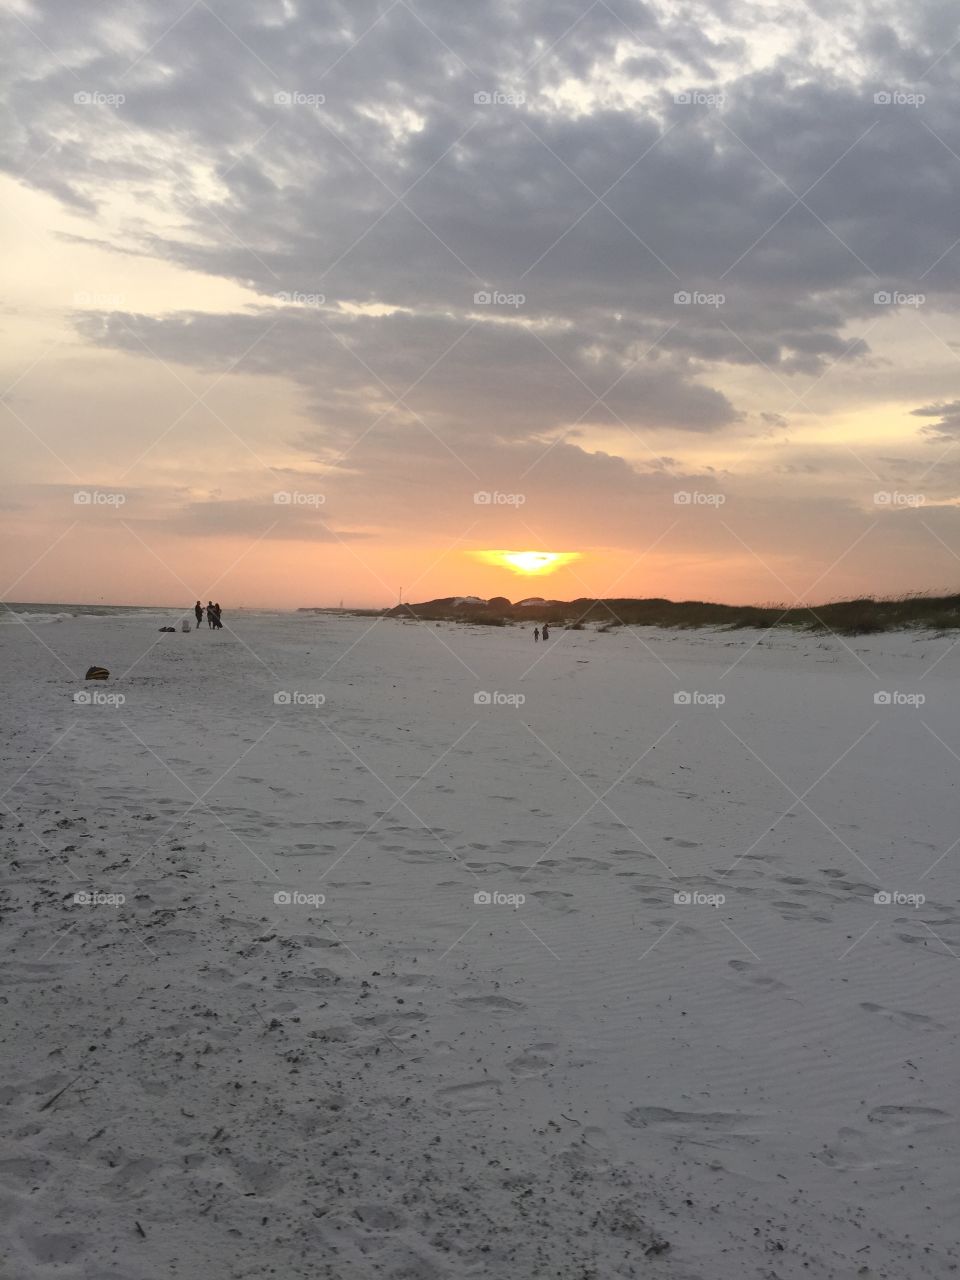 Some ladies in the family took an all woman's retreat and we were hanging out at the beach. Moment was priceless with the evening dusk and sun setting.  